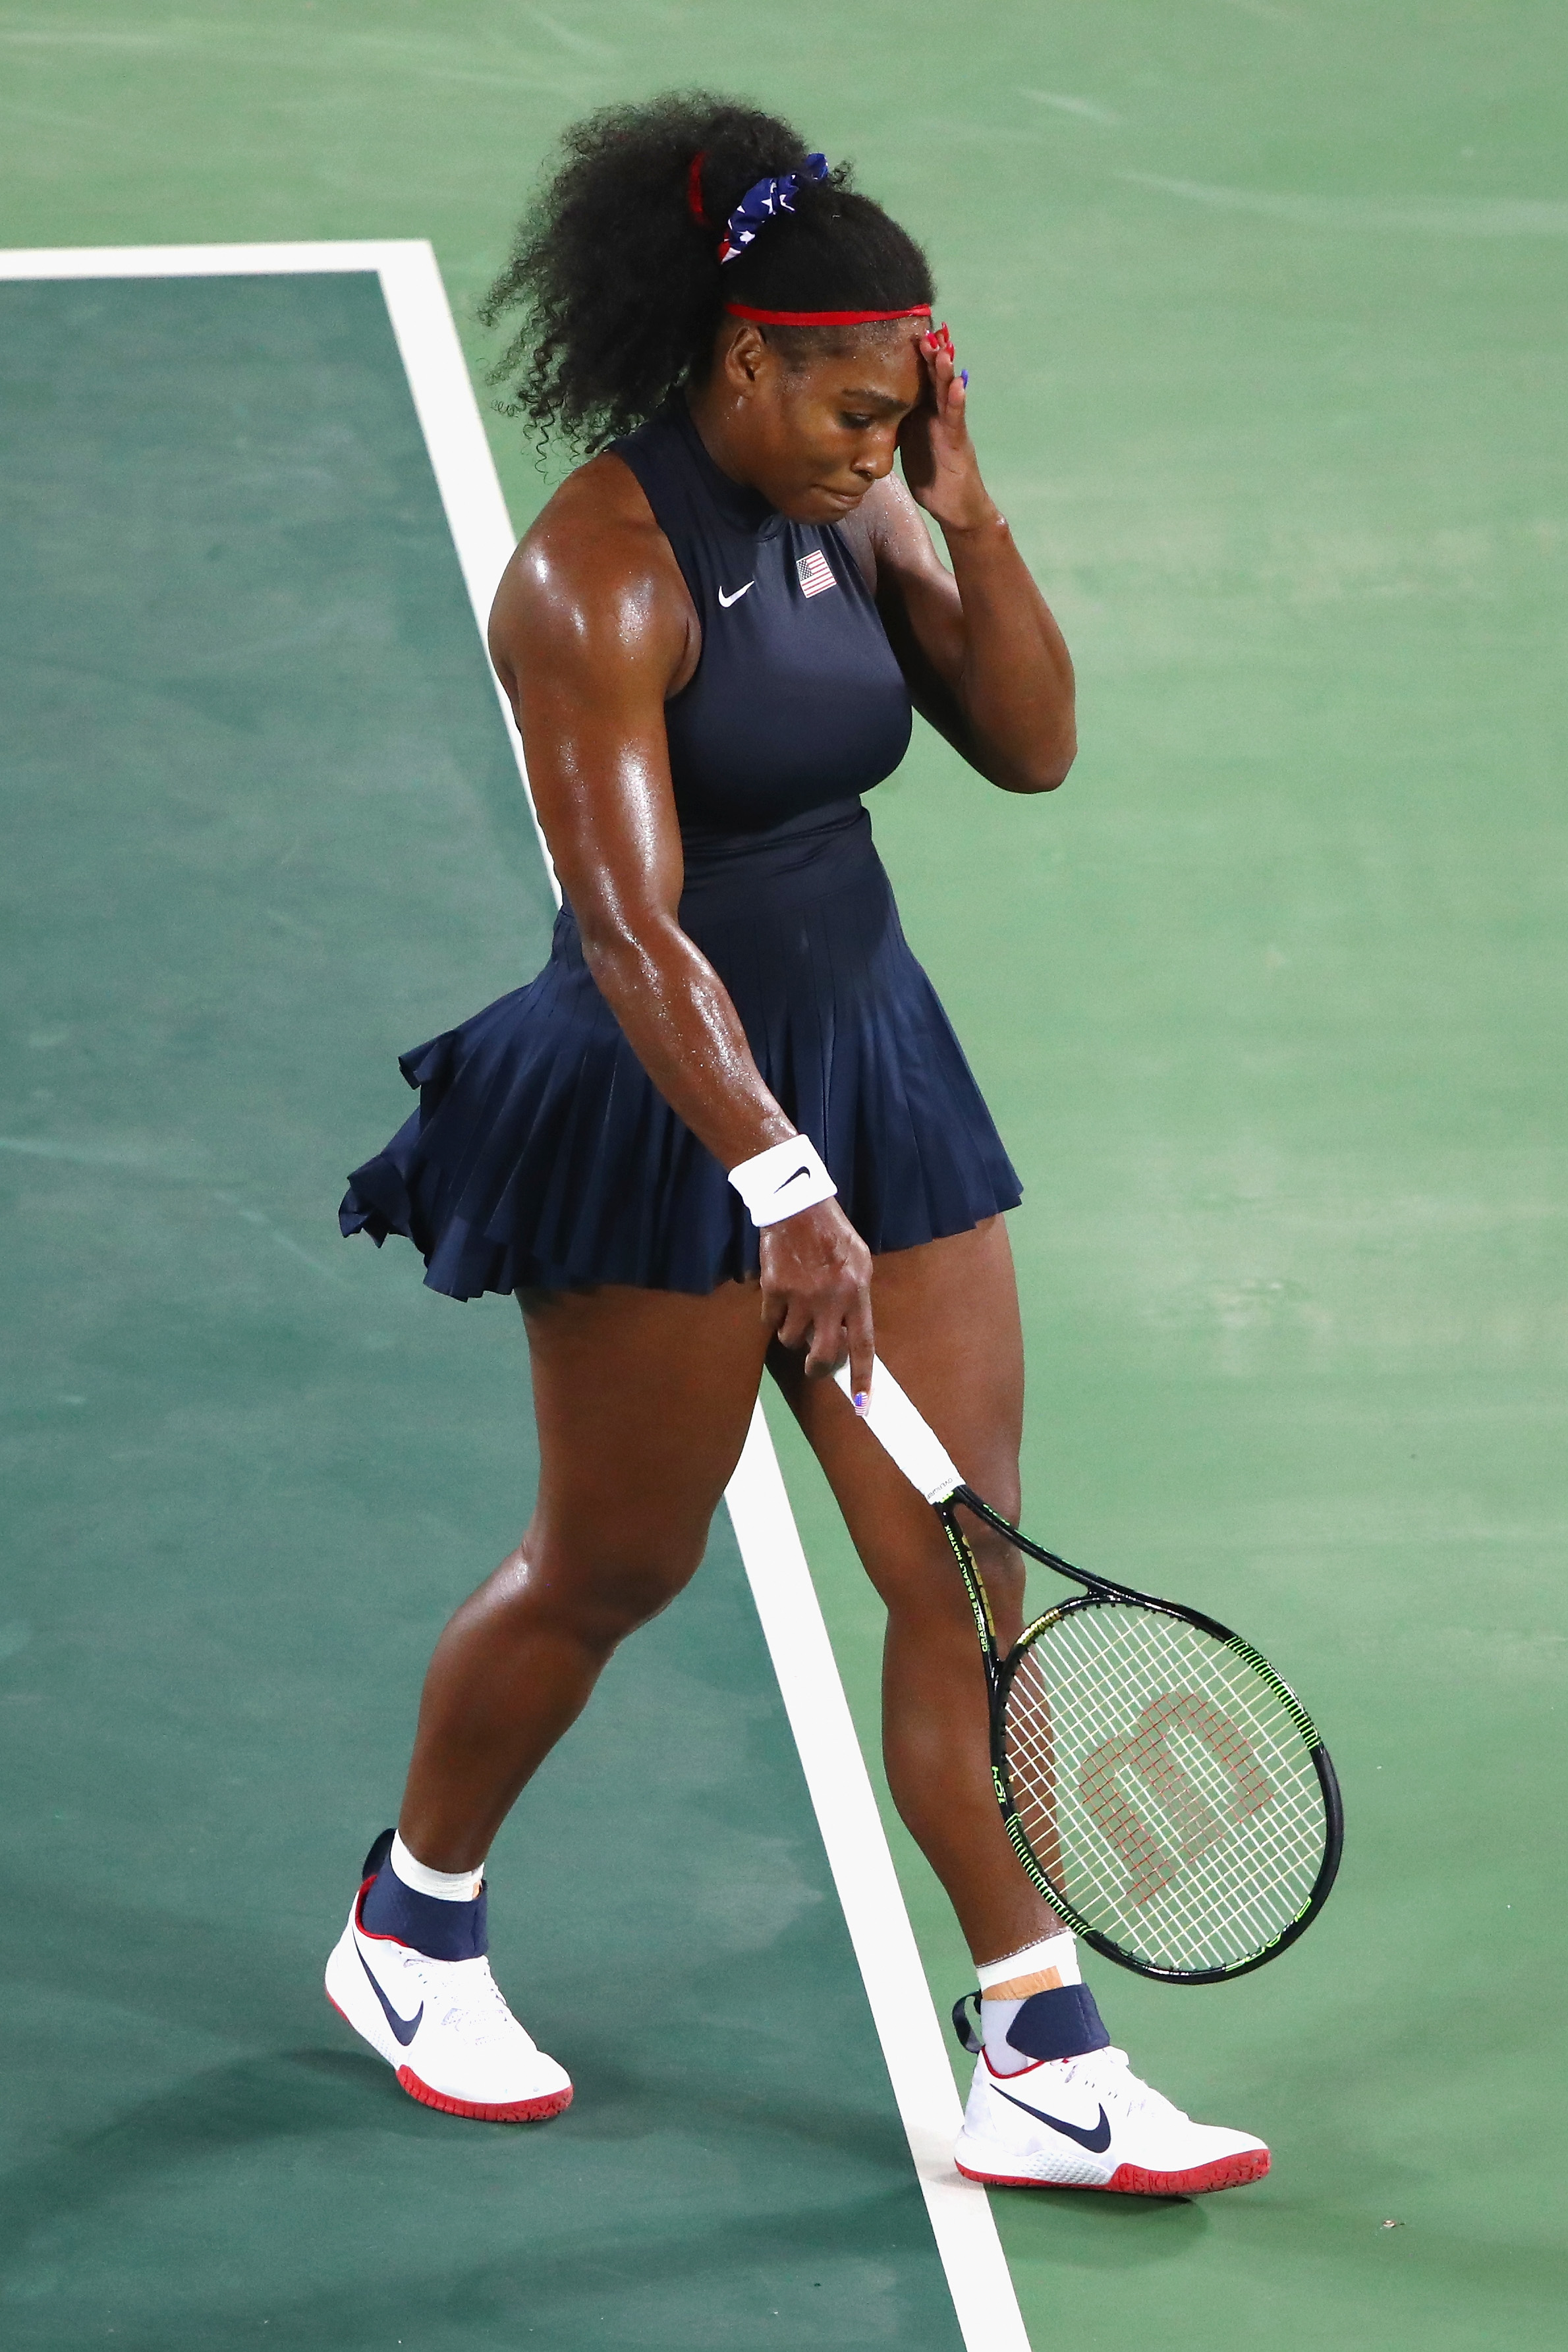 Serena Williams' 9 best tennis outfits, ranked 'meh' to fabulous | For The Win